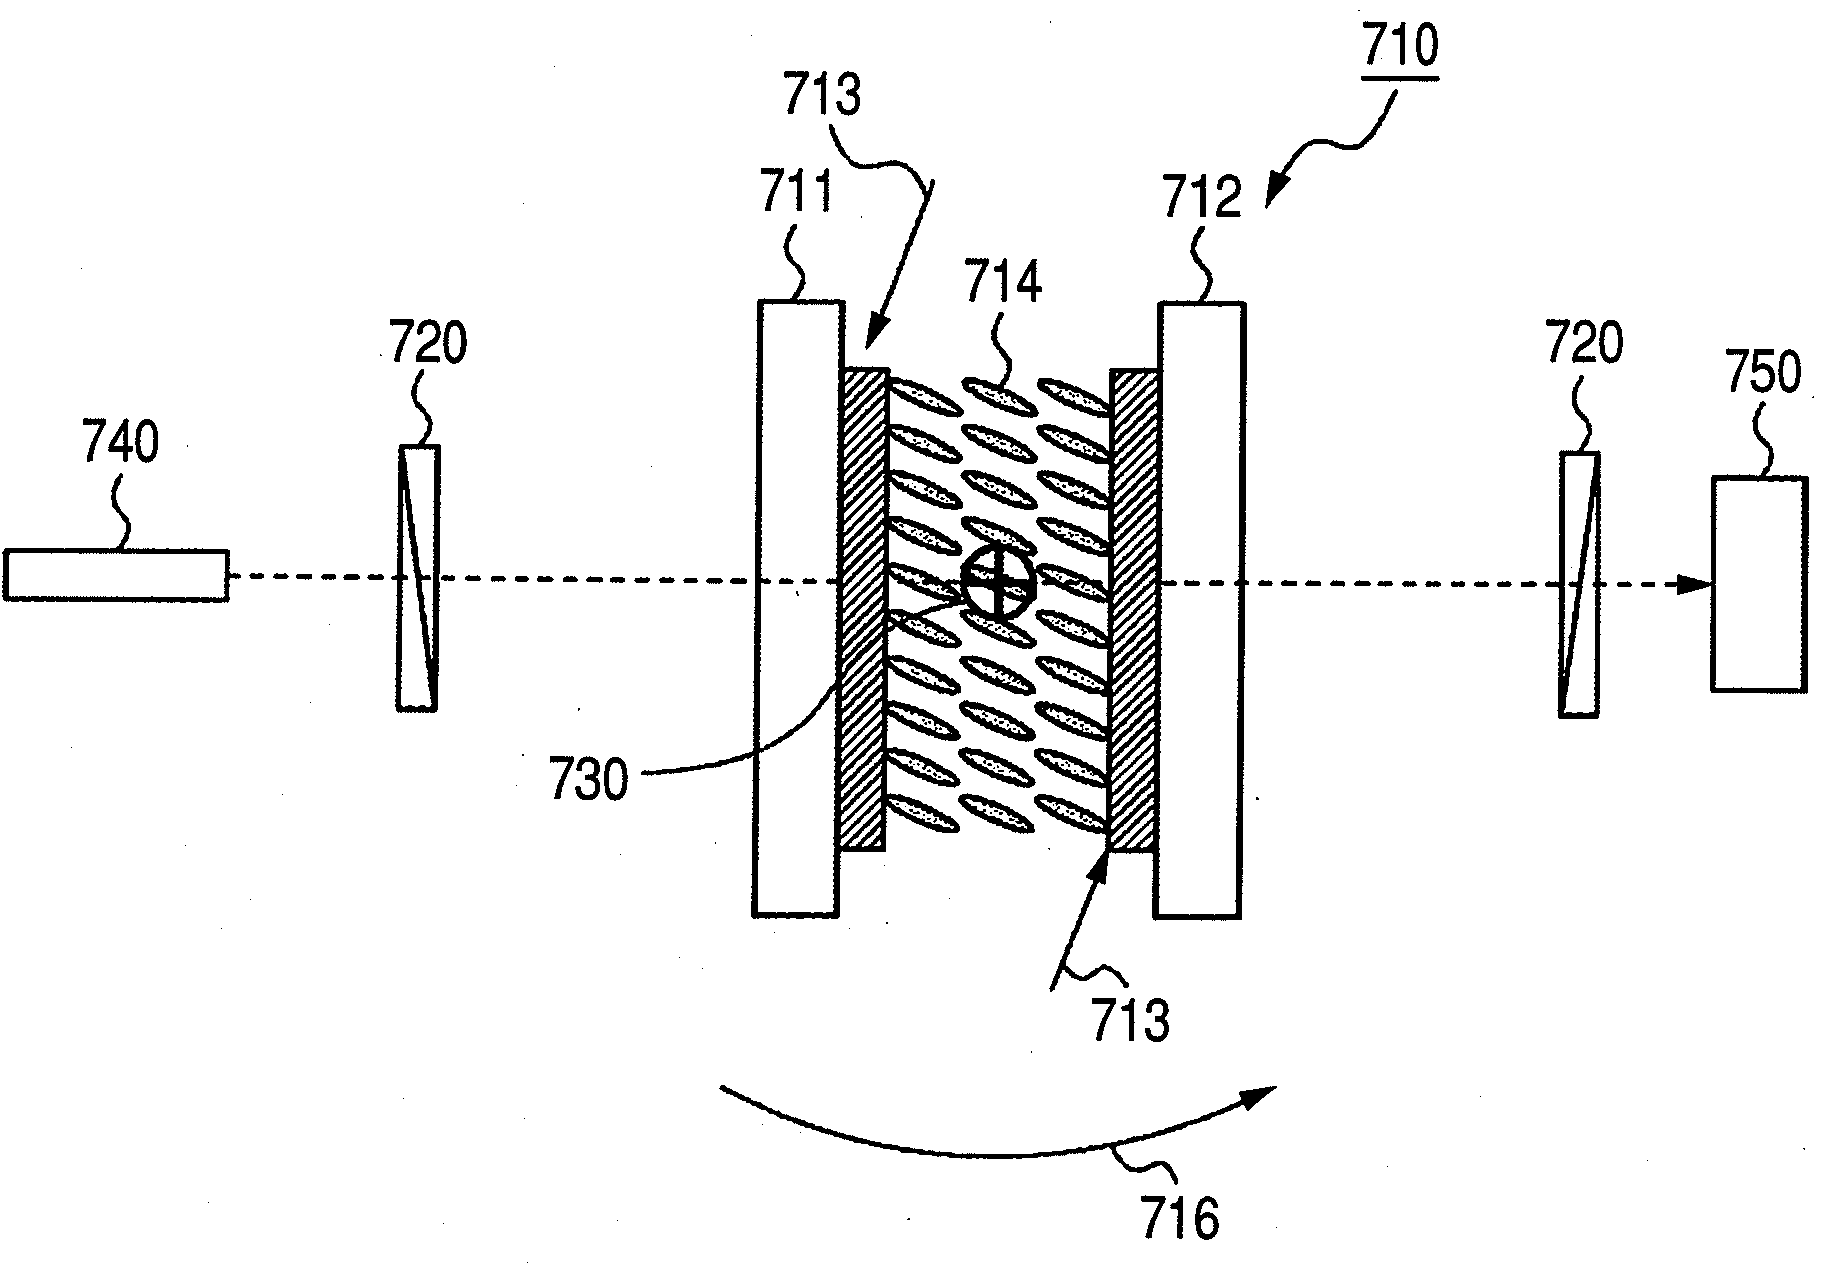 Liquid crystal optical device manufacturing process